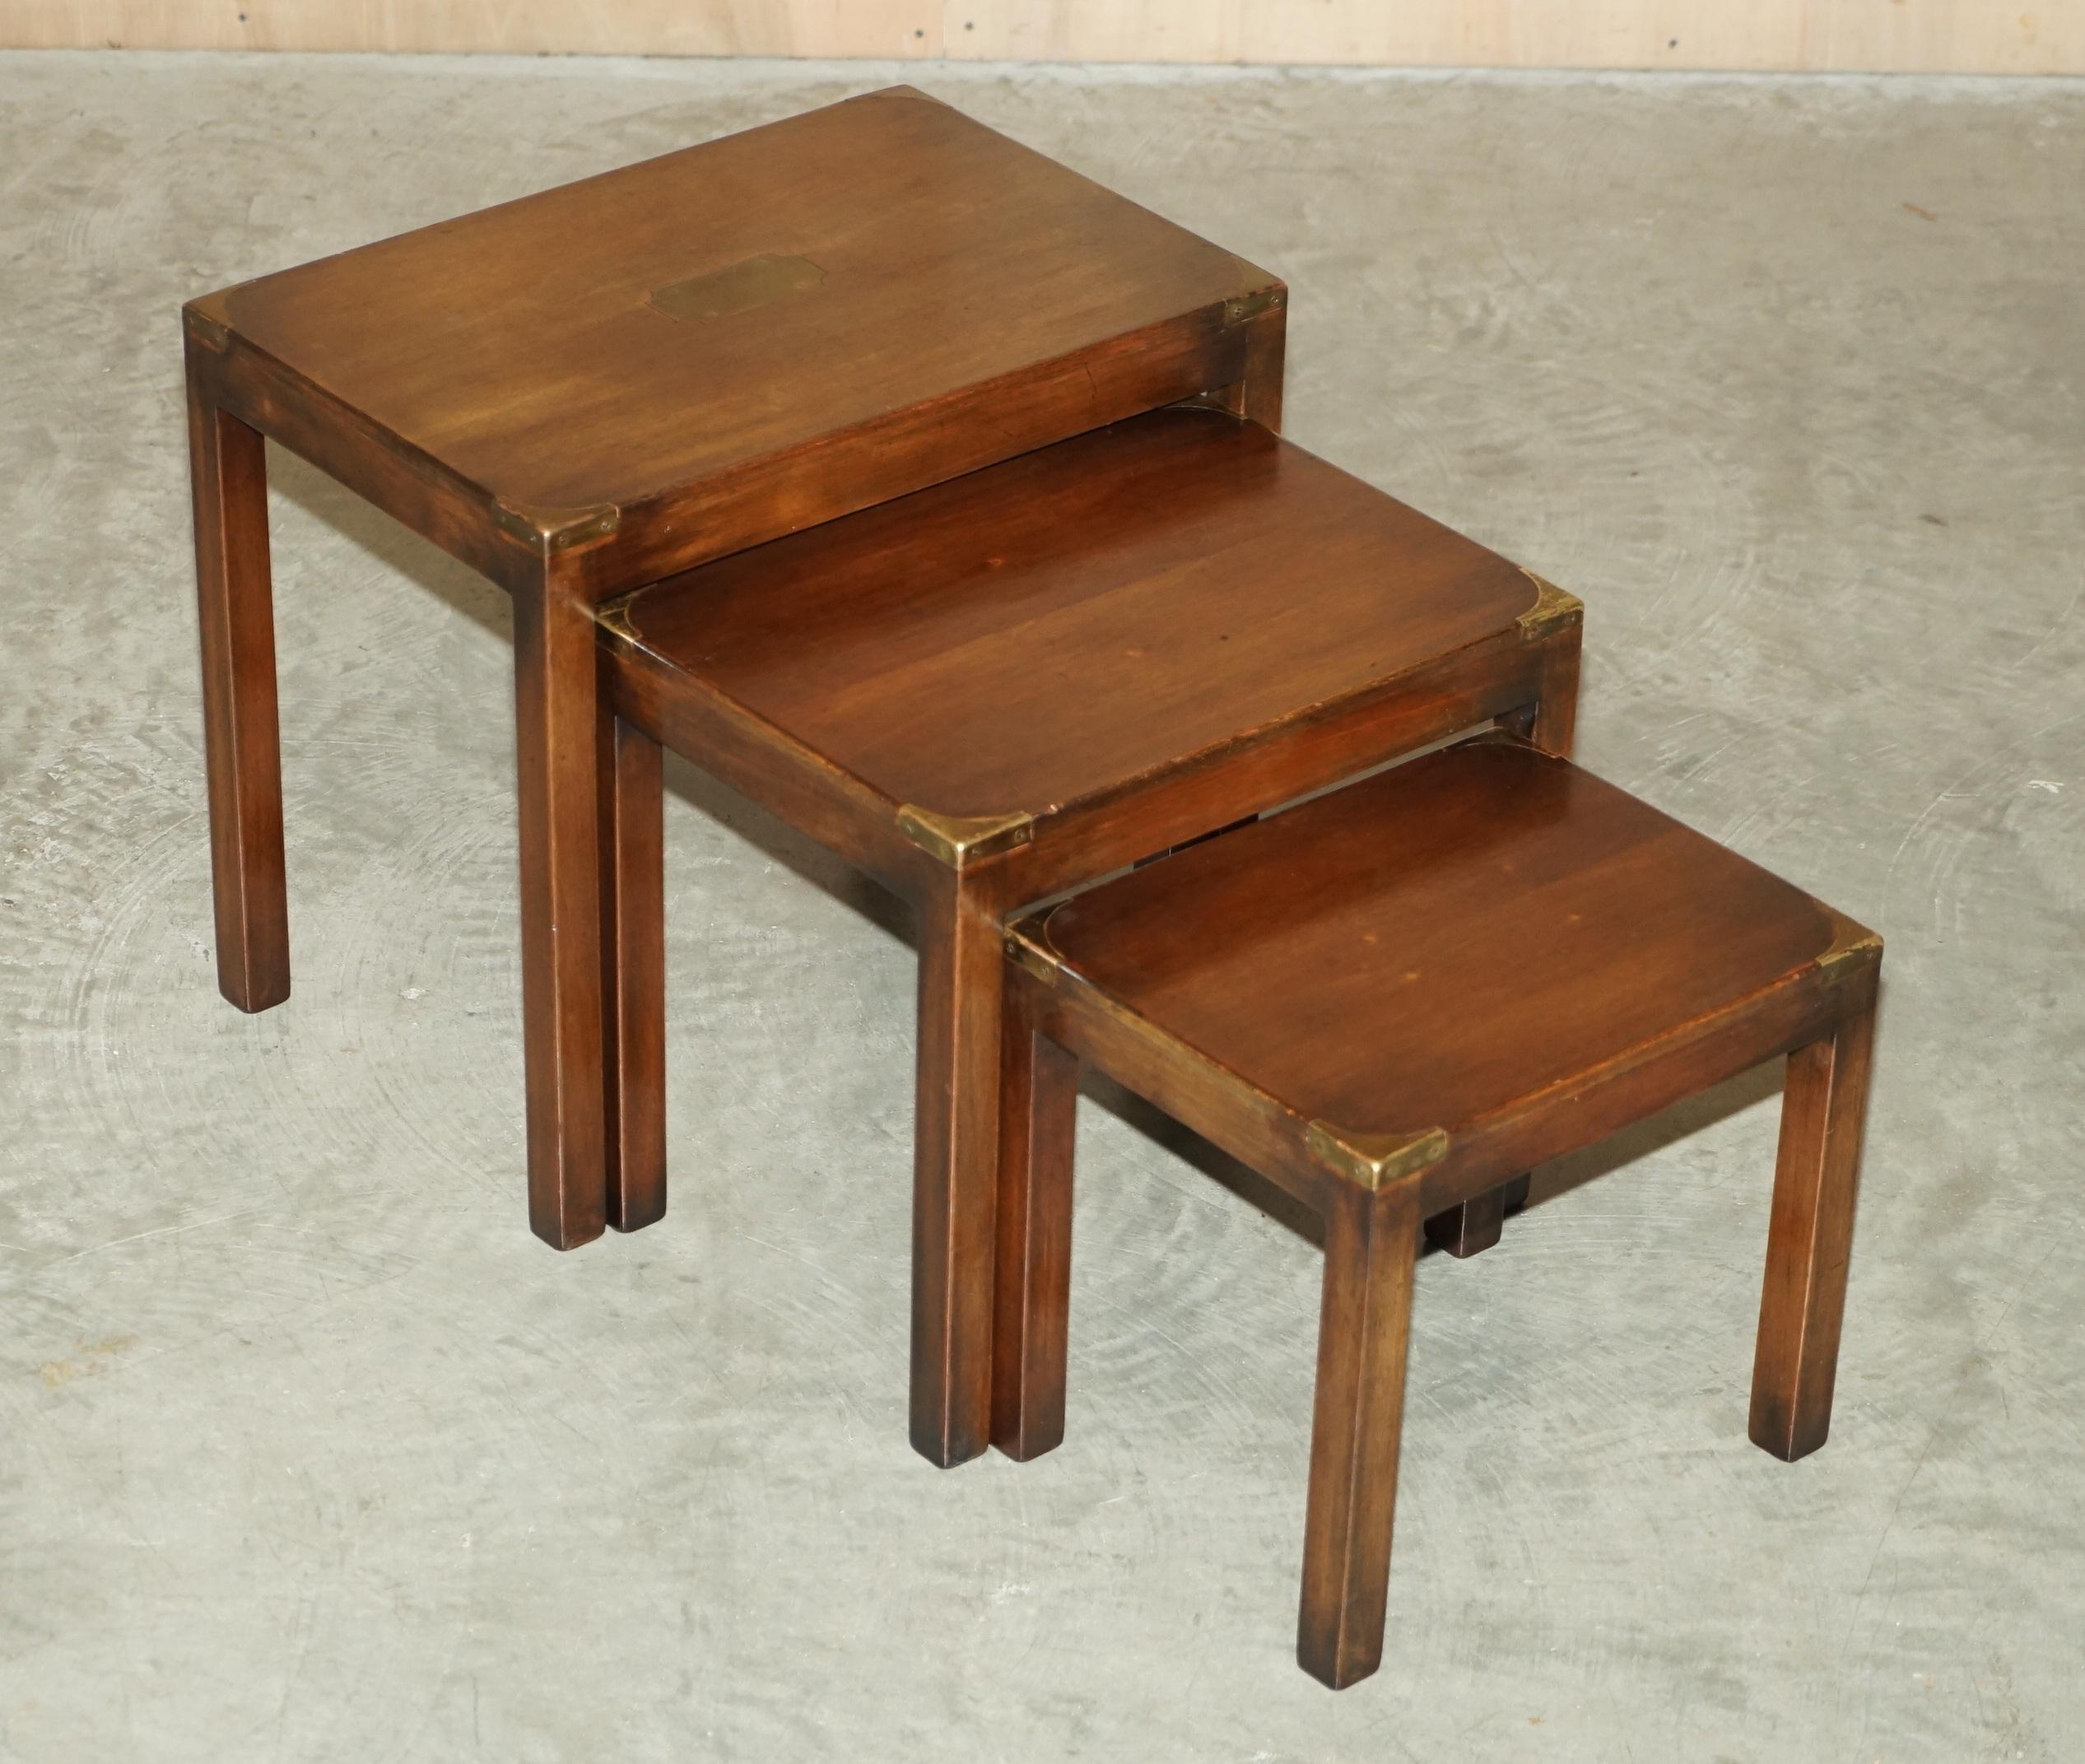 We are delighted to offer for sale this lovely Harrods Kennedy nest of three Military Campaign side tables

A nice decorative set, they are made in the military campaign style so brass fittings and in light mahogany.

The set has been cleaned